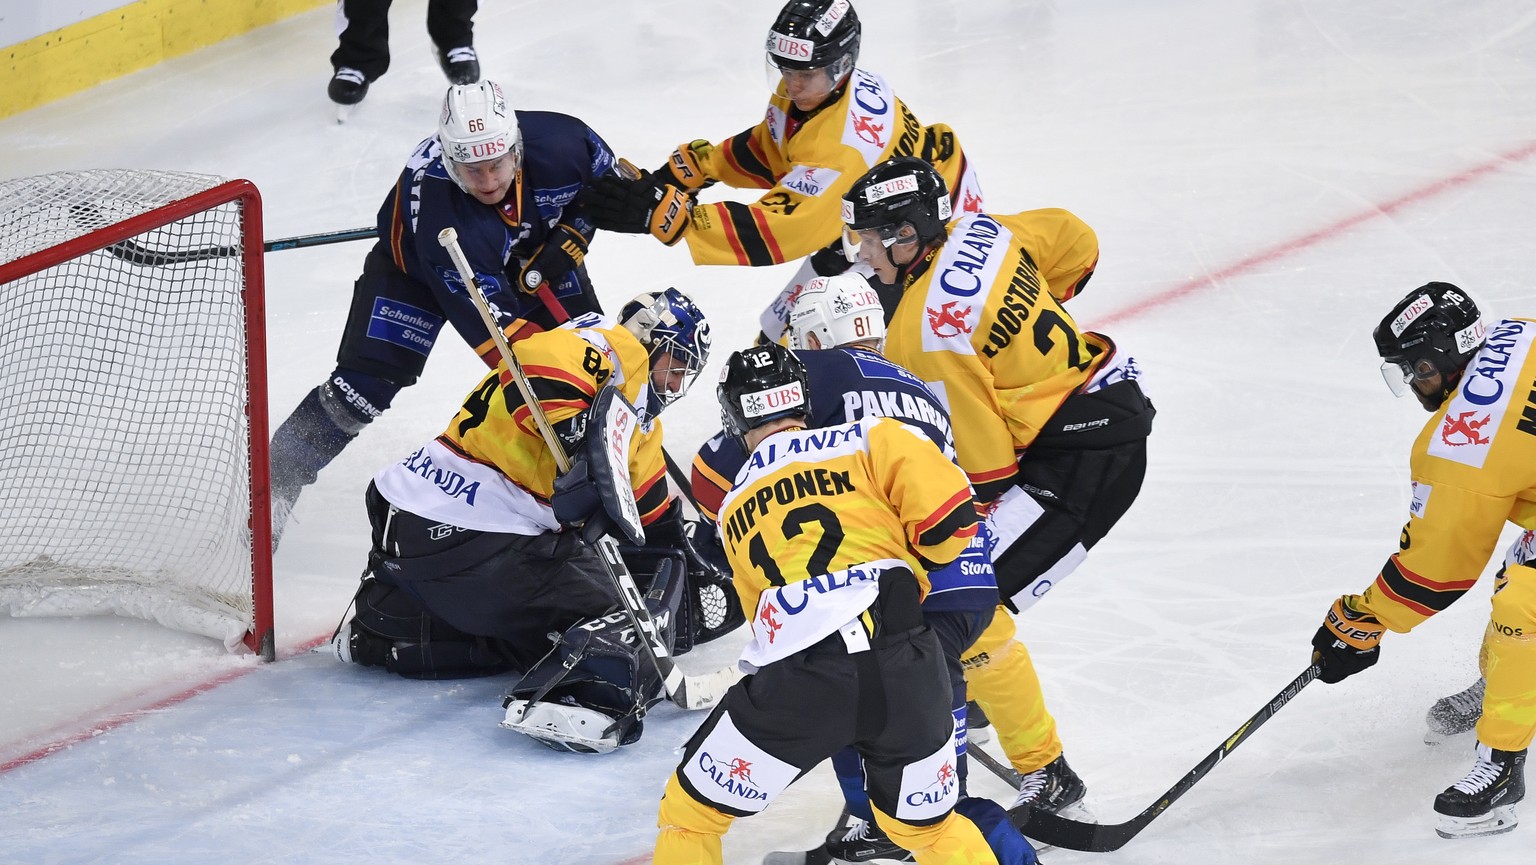 Kalevan Pallo&#039;s goalkeeper Daniel Manzato, center, fights for the puck during the game between HK Metallurg Magnitogorsk and KalPa Kuopio Hockey Oy at the 92th Spengler Cup ice hockey tournament  ...